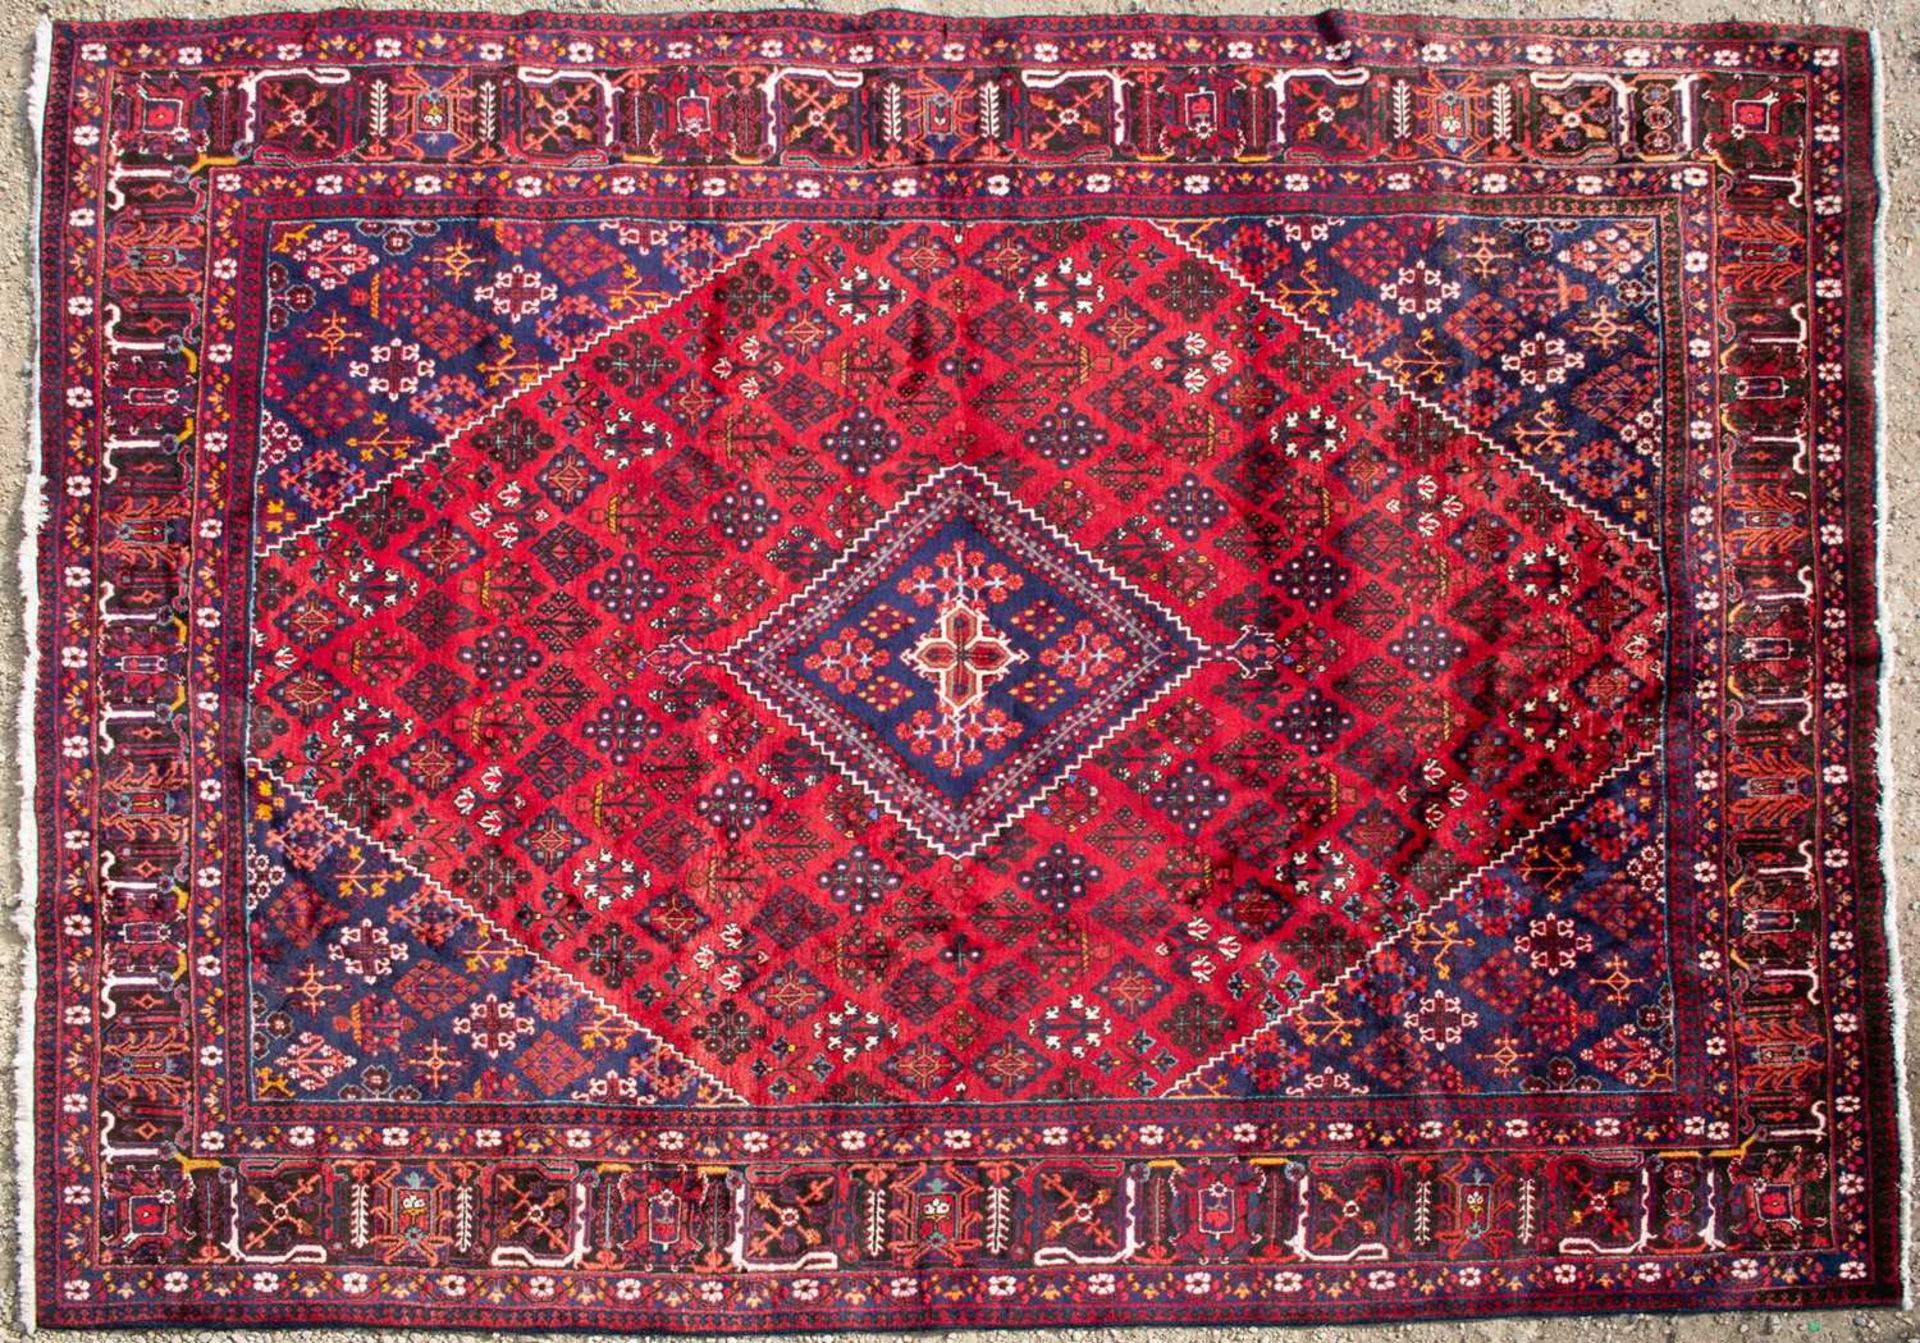 An Oriental red ground large rug with geometric floral designs, 370cm x 278cmMinor marks and wear